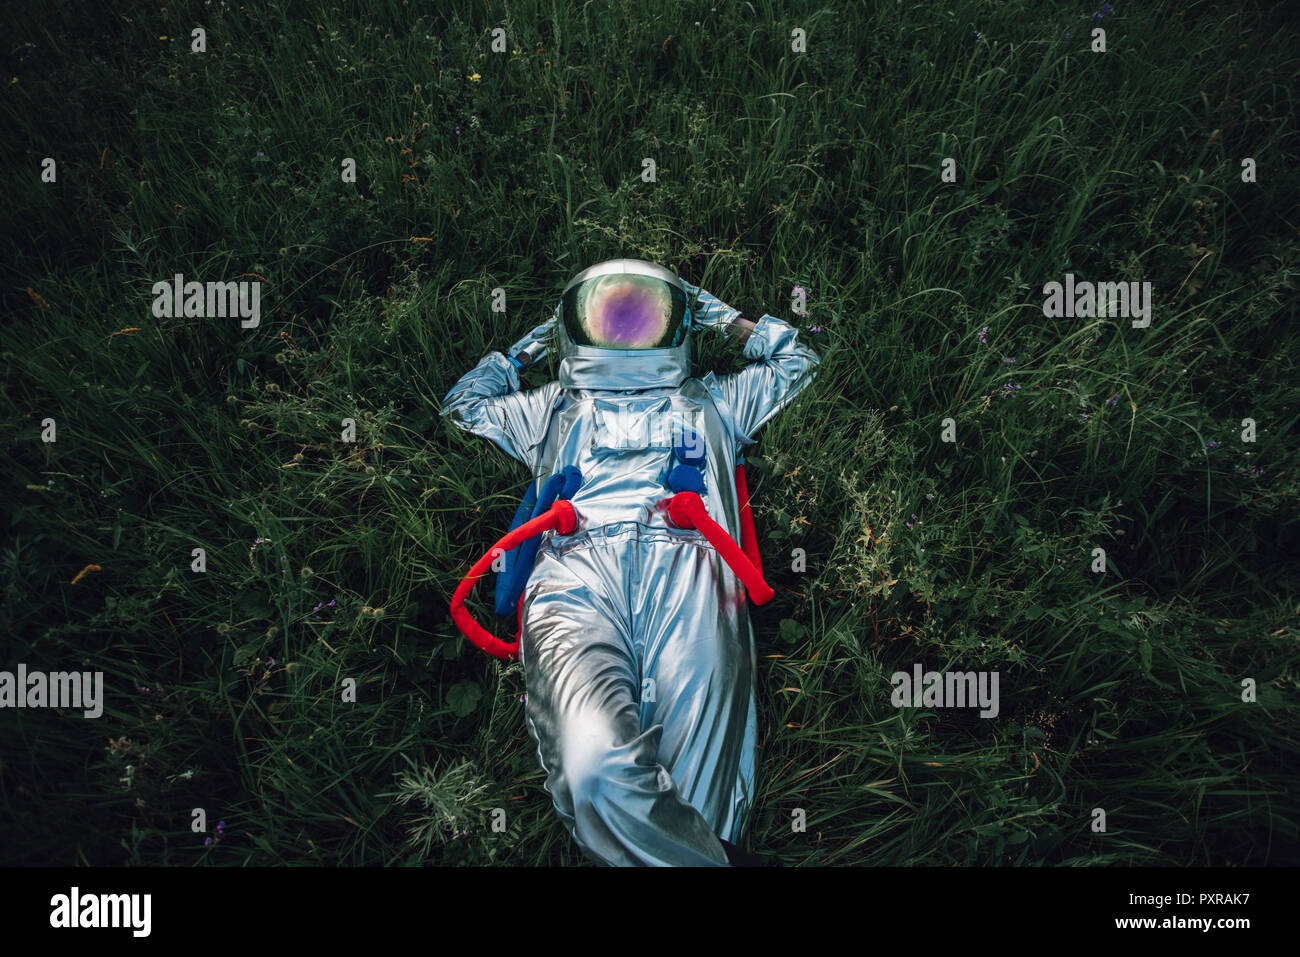 Spaceman exploring nature, relaxing in meadow Stock Photo